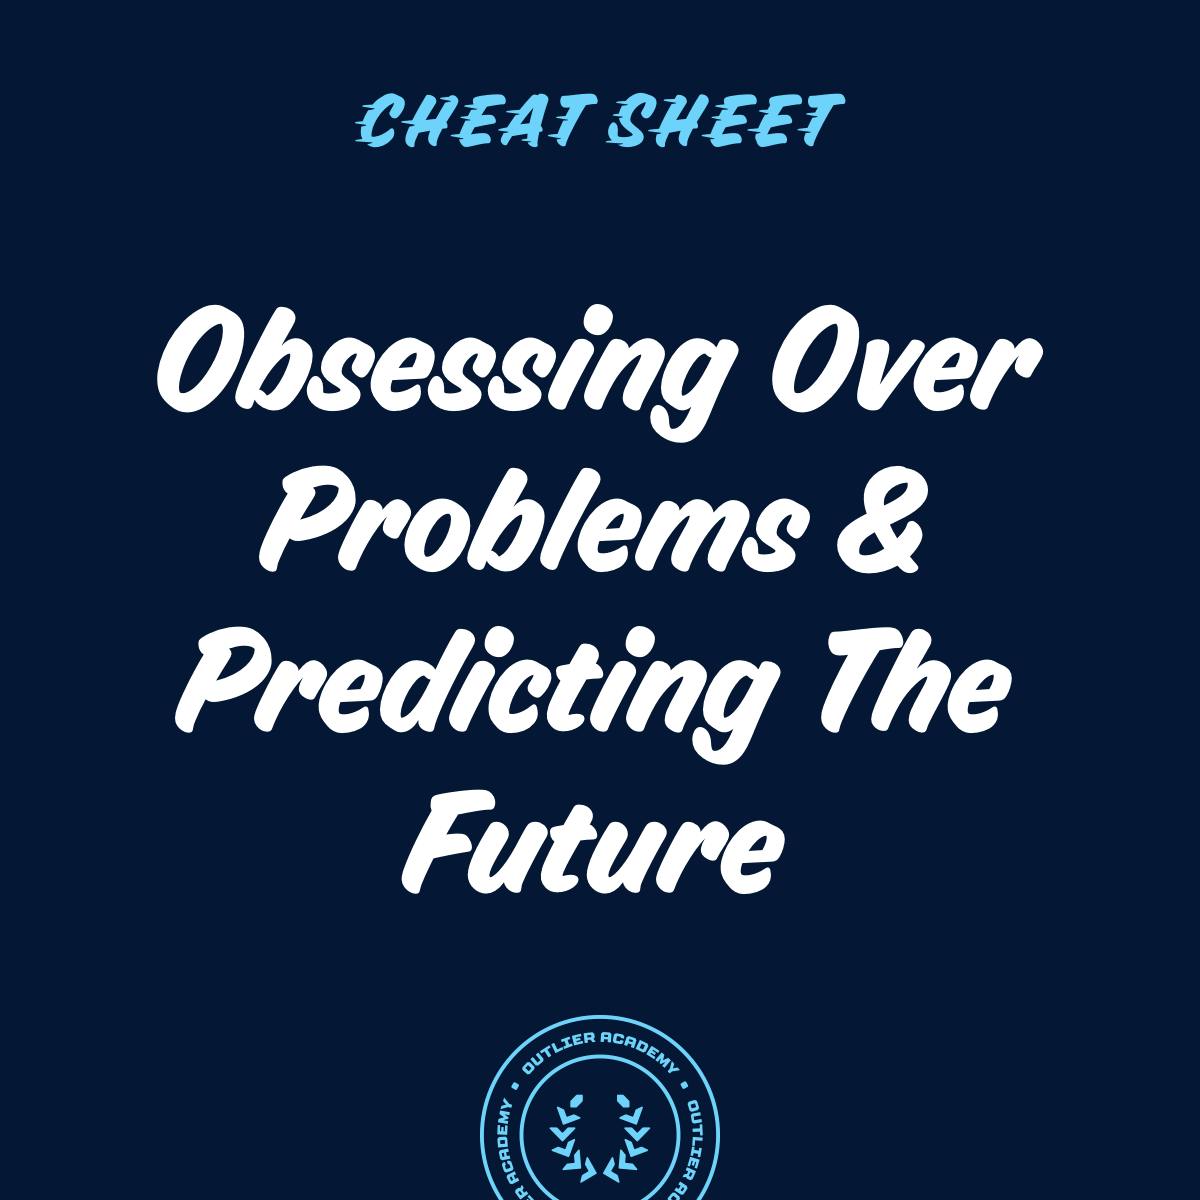 Cheat Sheet: On Obsessing Over Problems, Predicting the Future, and Why Healthcare Should be a Product (Not a Service)